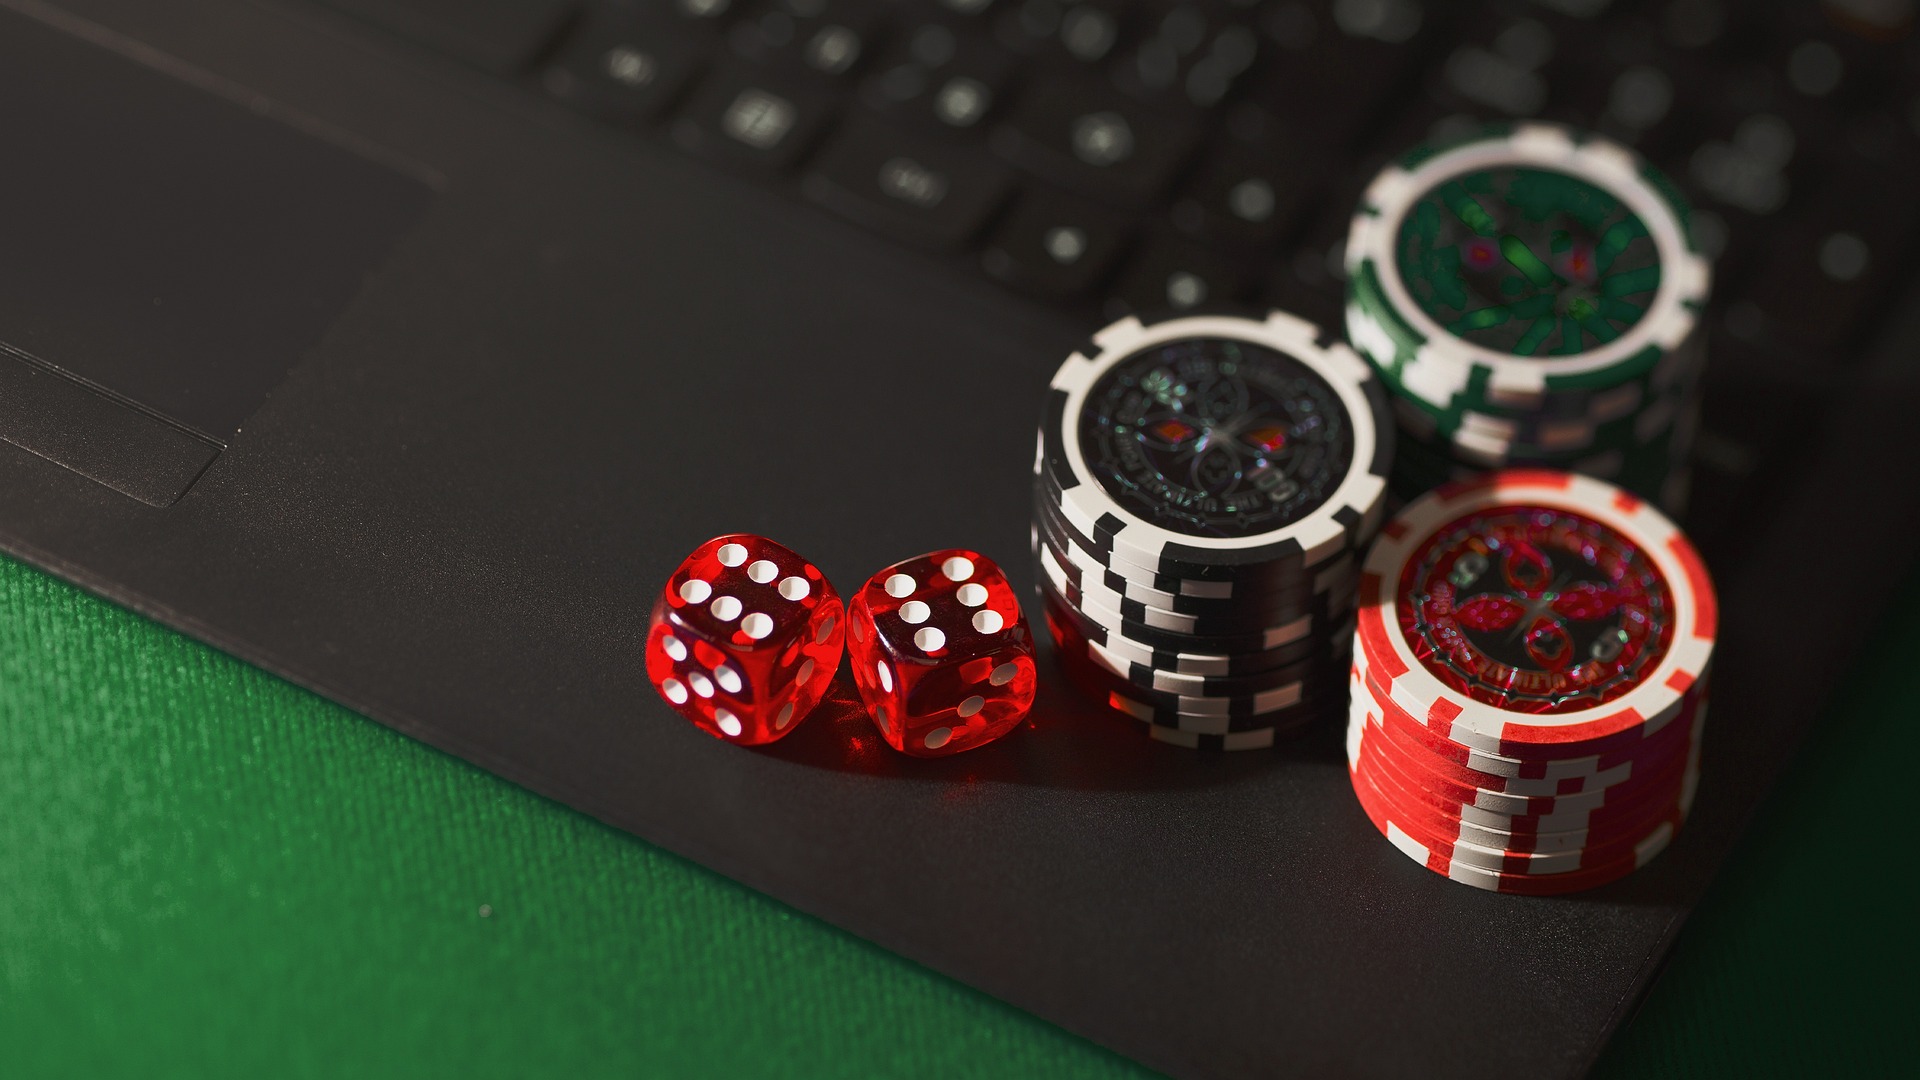 Conversation Article: Technology can play a vital role in limiting online  gambling – here's how | Bournemouth University